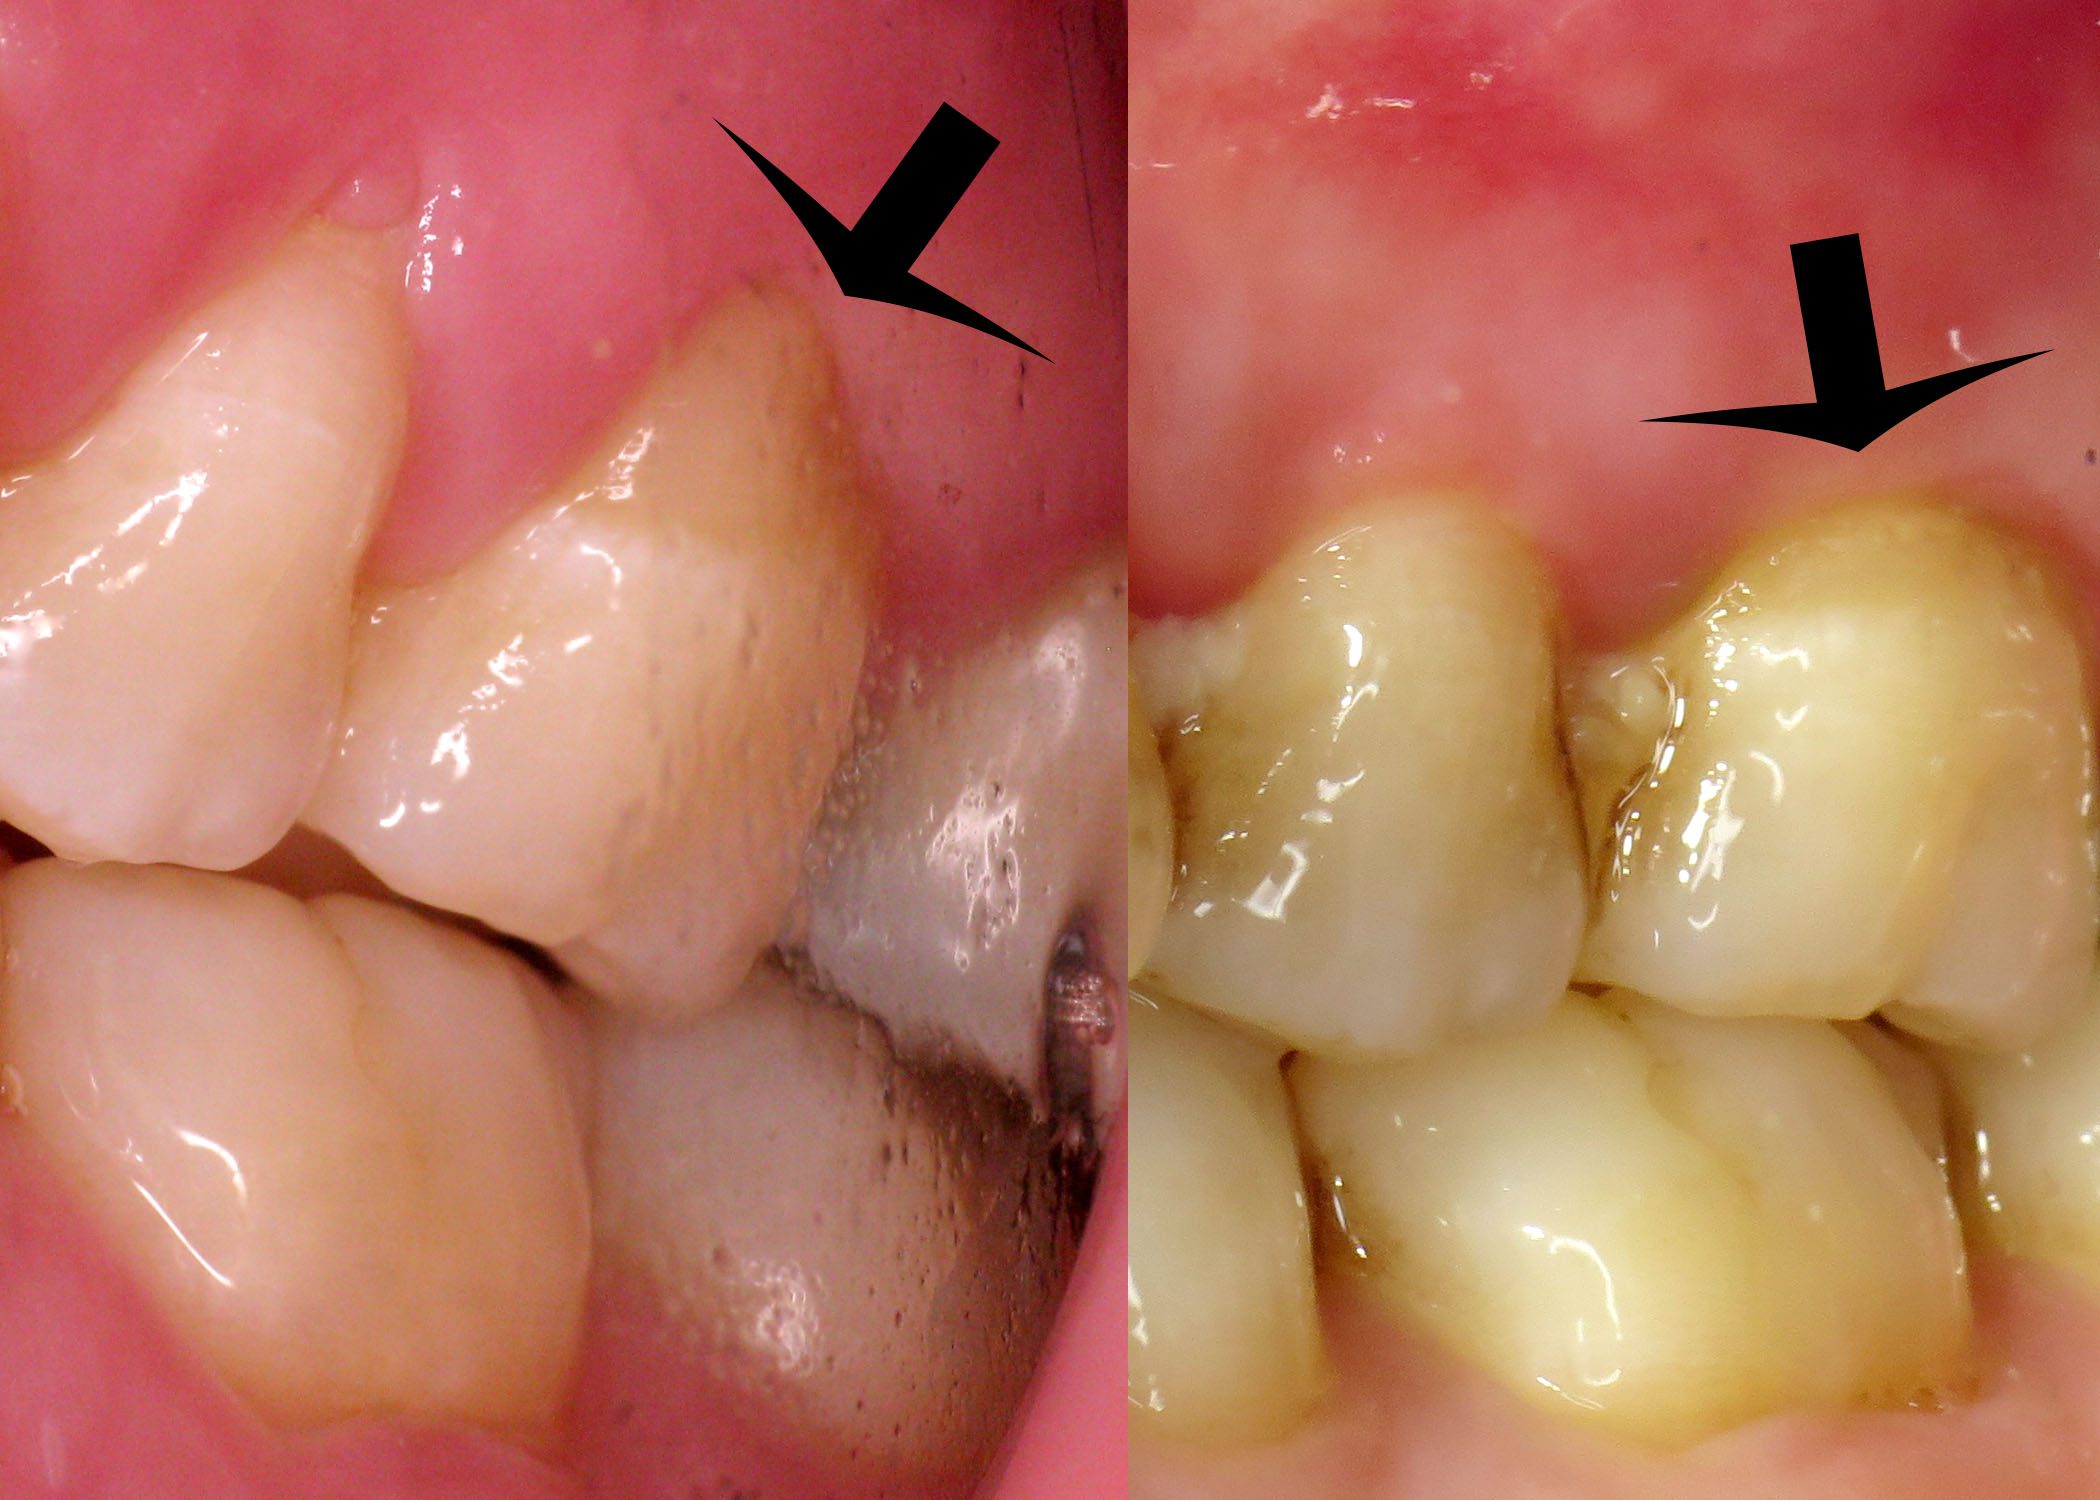 Treatment of Gingival Recession